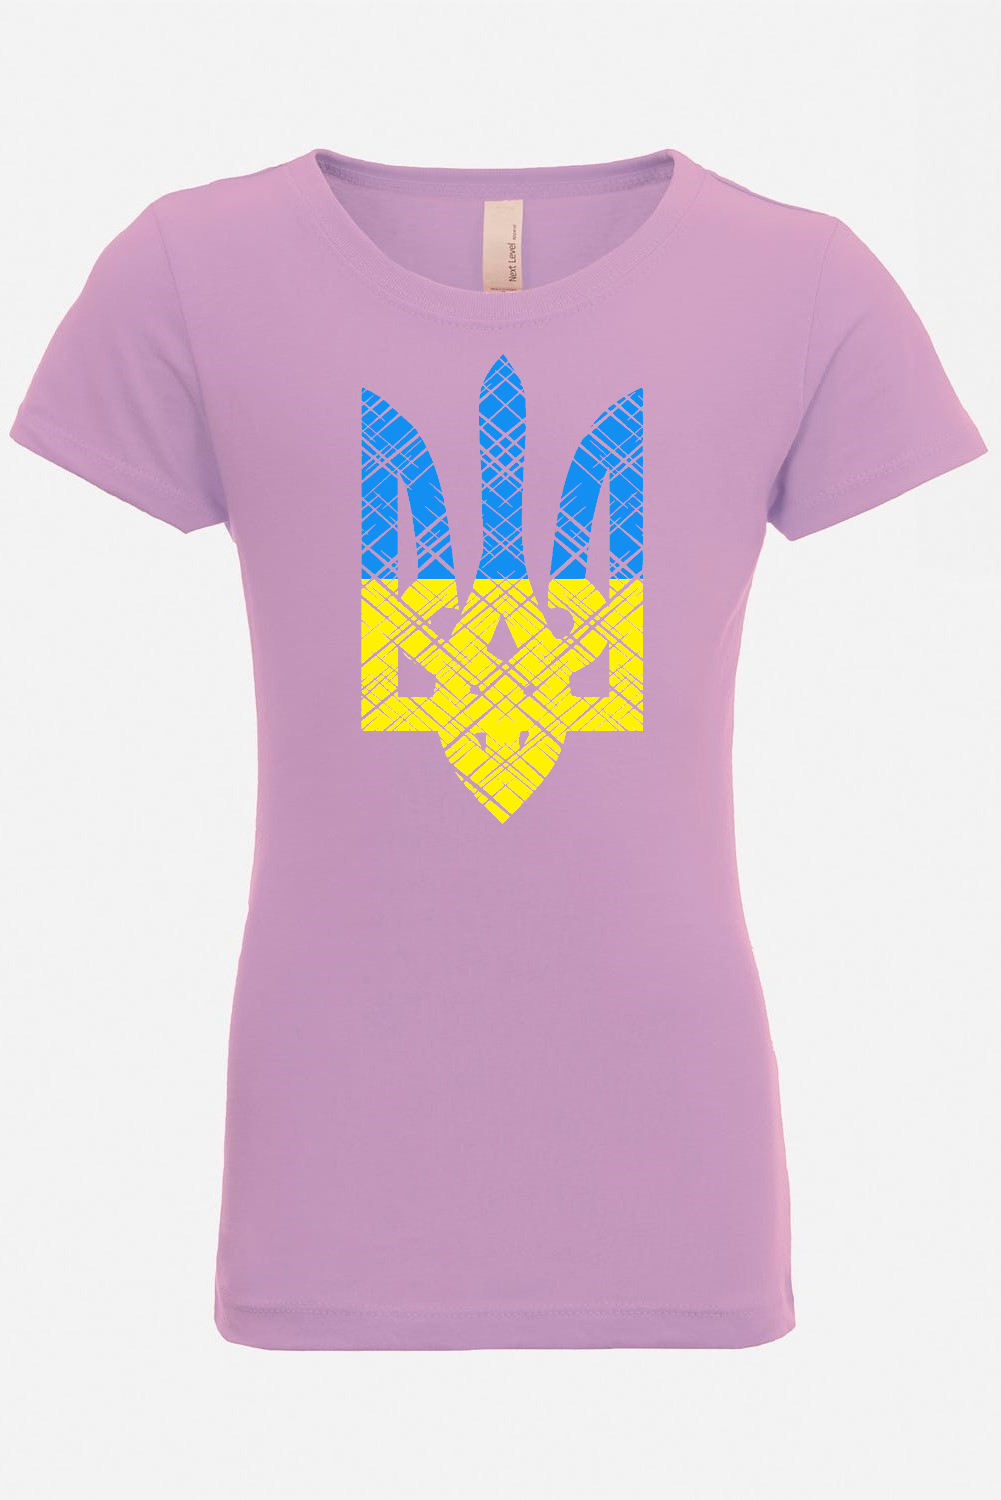 Girl's t-shirt "Blue and yellow Trident"